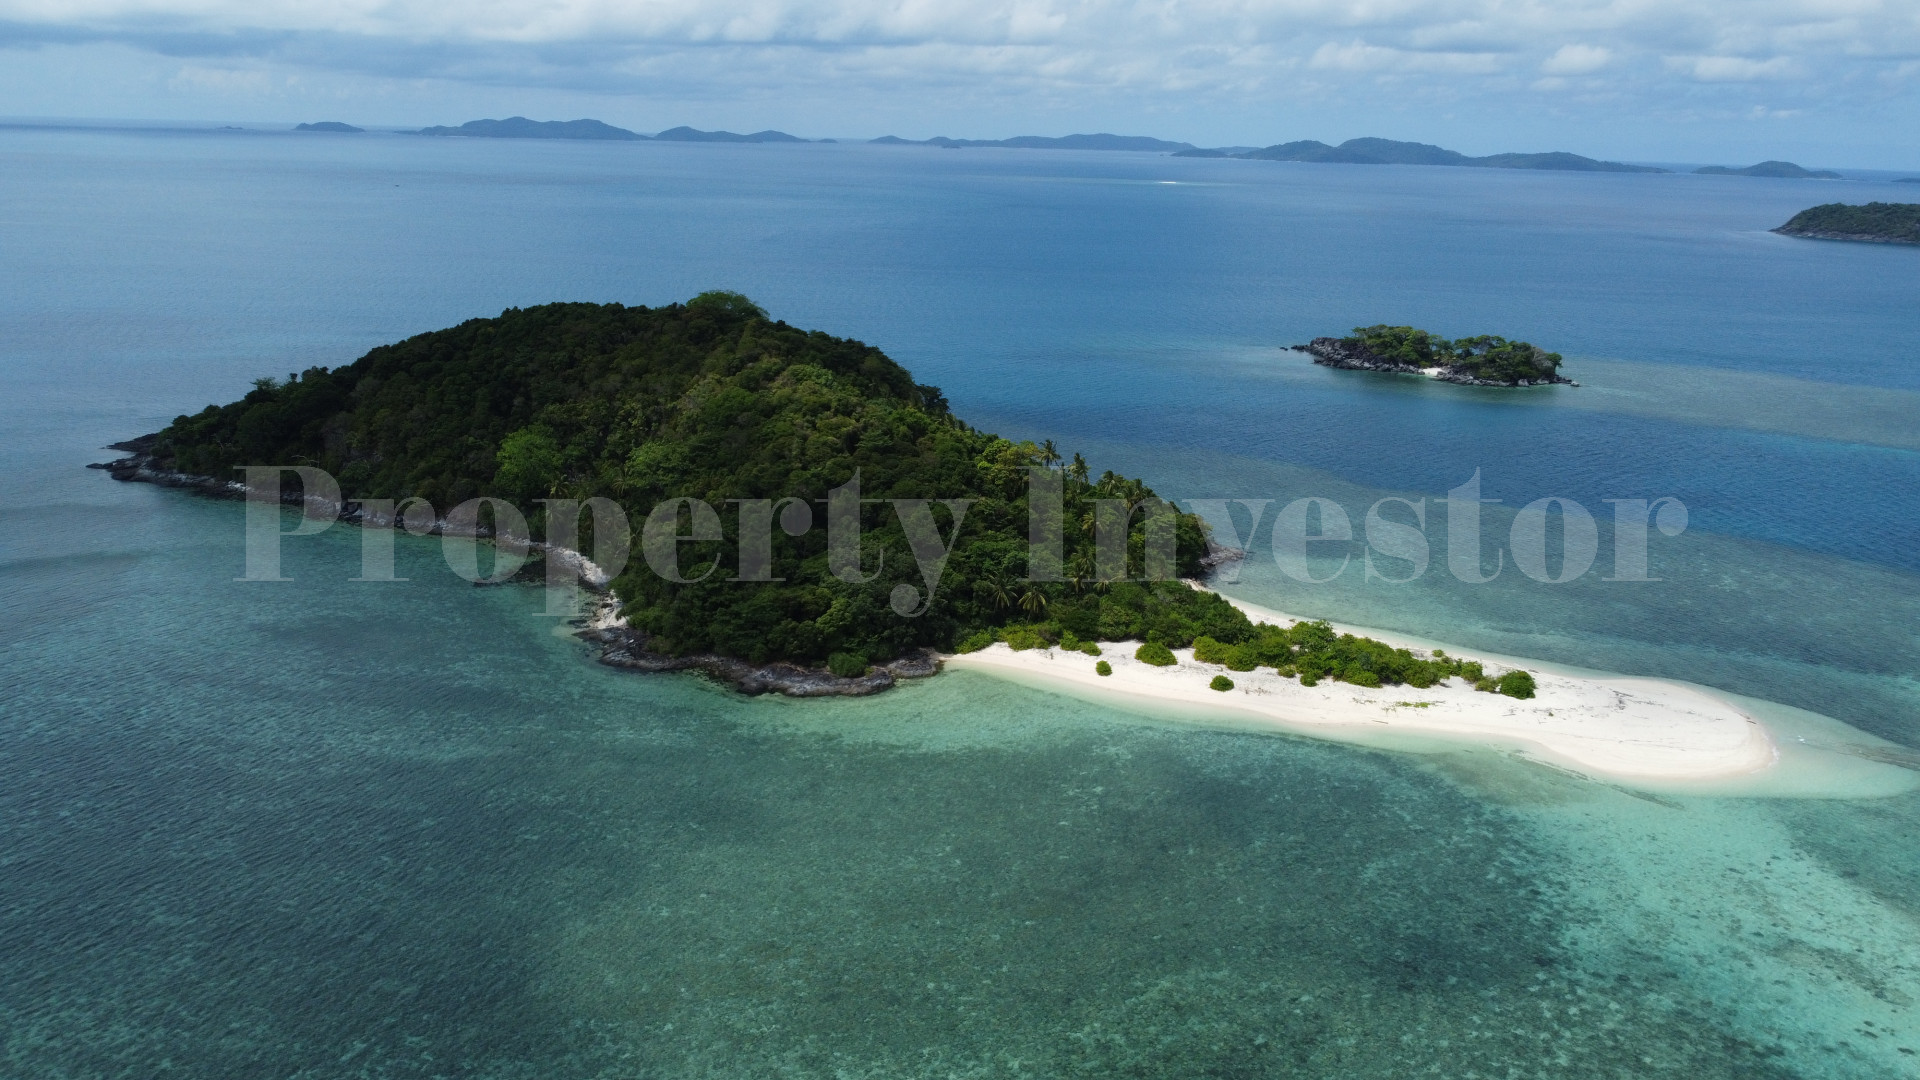 Untouched 7 Hectare Virgin Island for Commercial Development for Sale in the Riau Islands, Indonesia